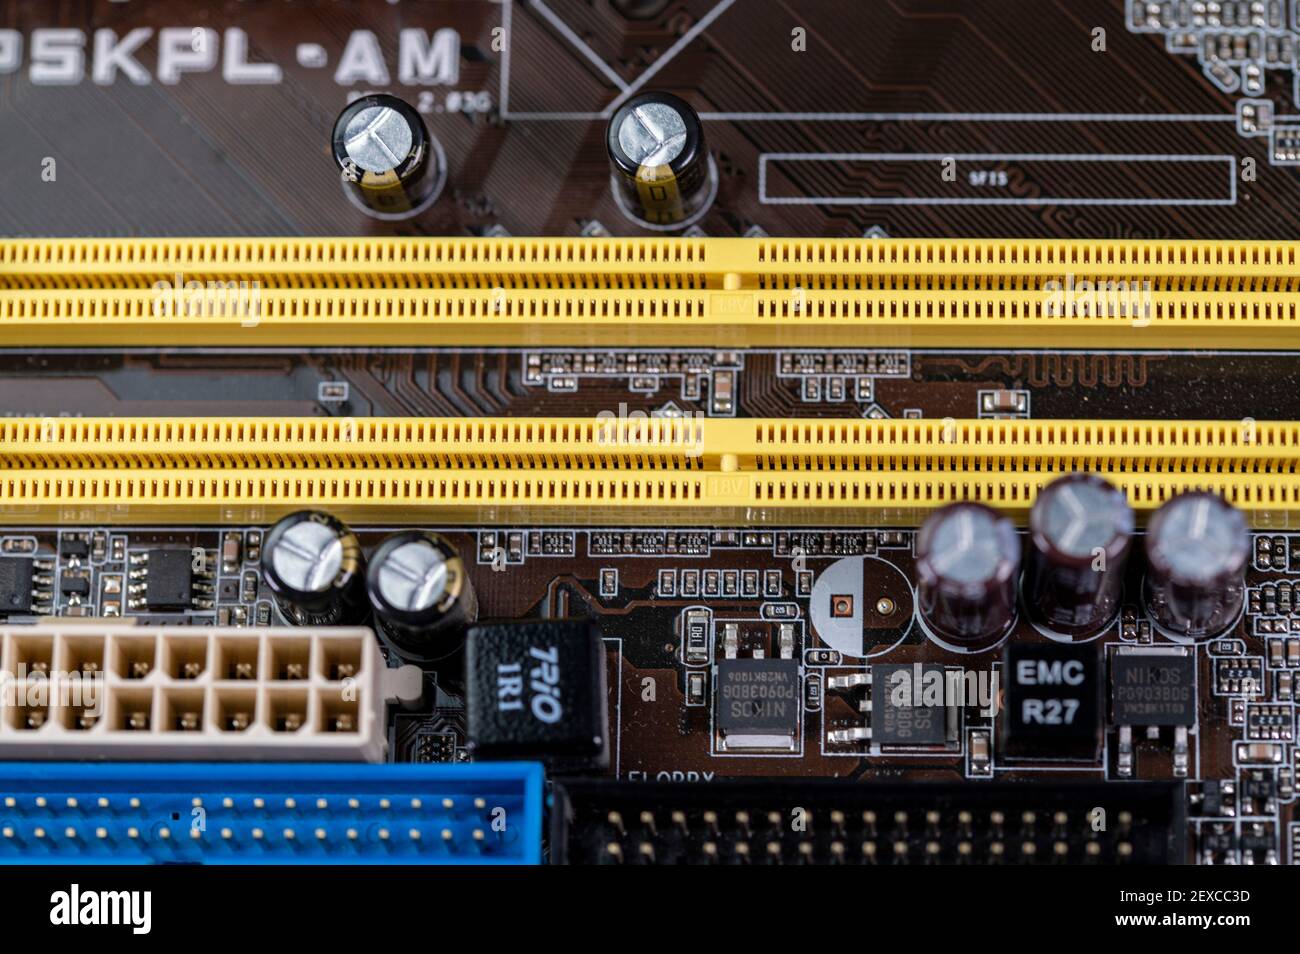 detail of a motherboard with connectors and heatsinks Stock Photo